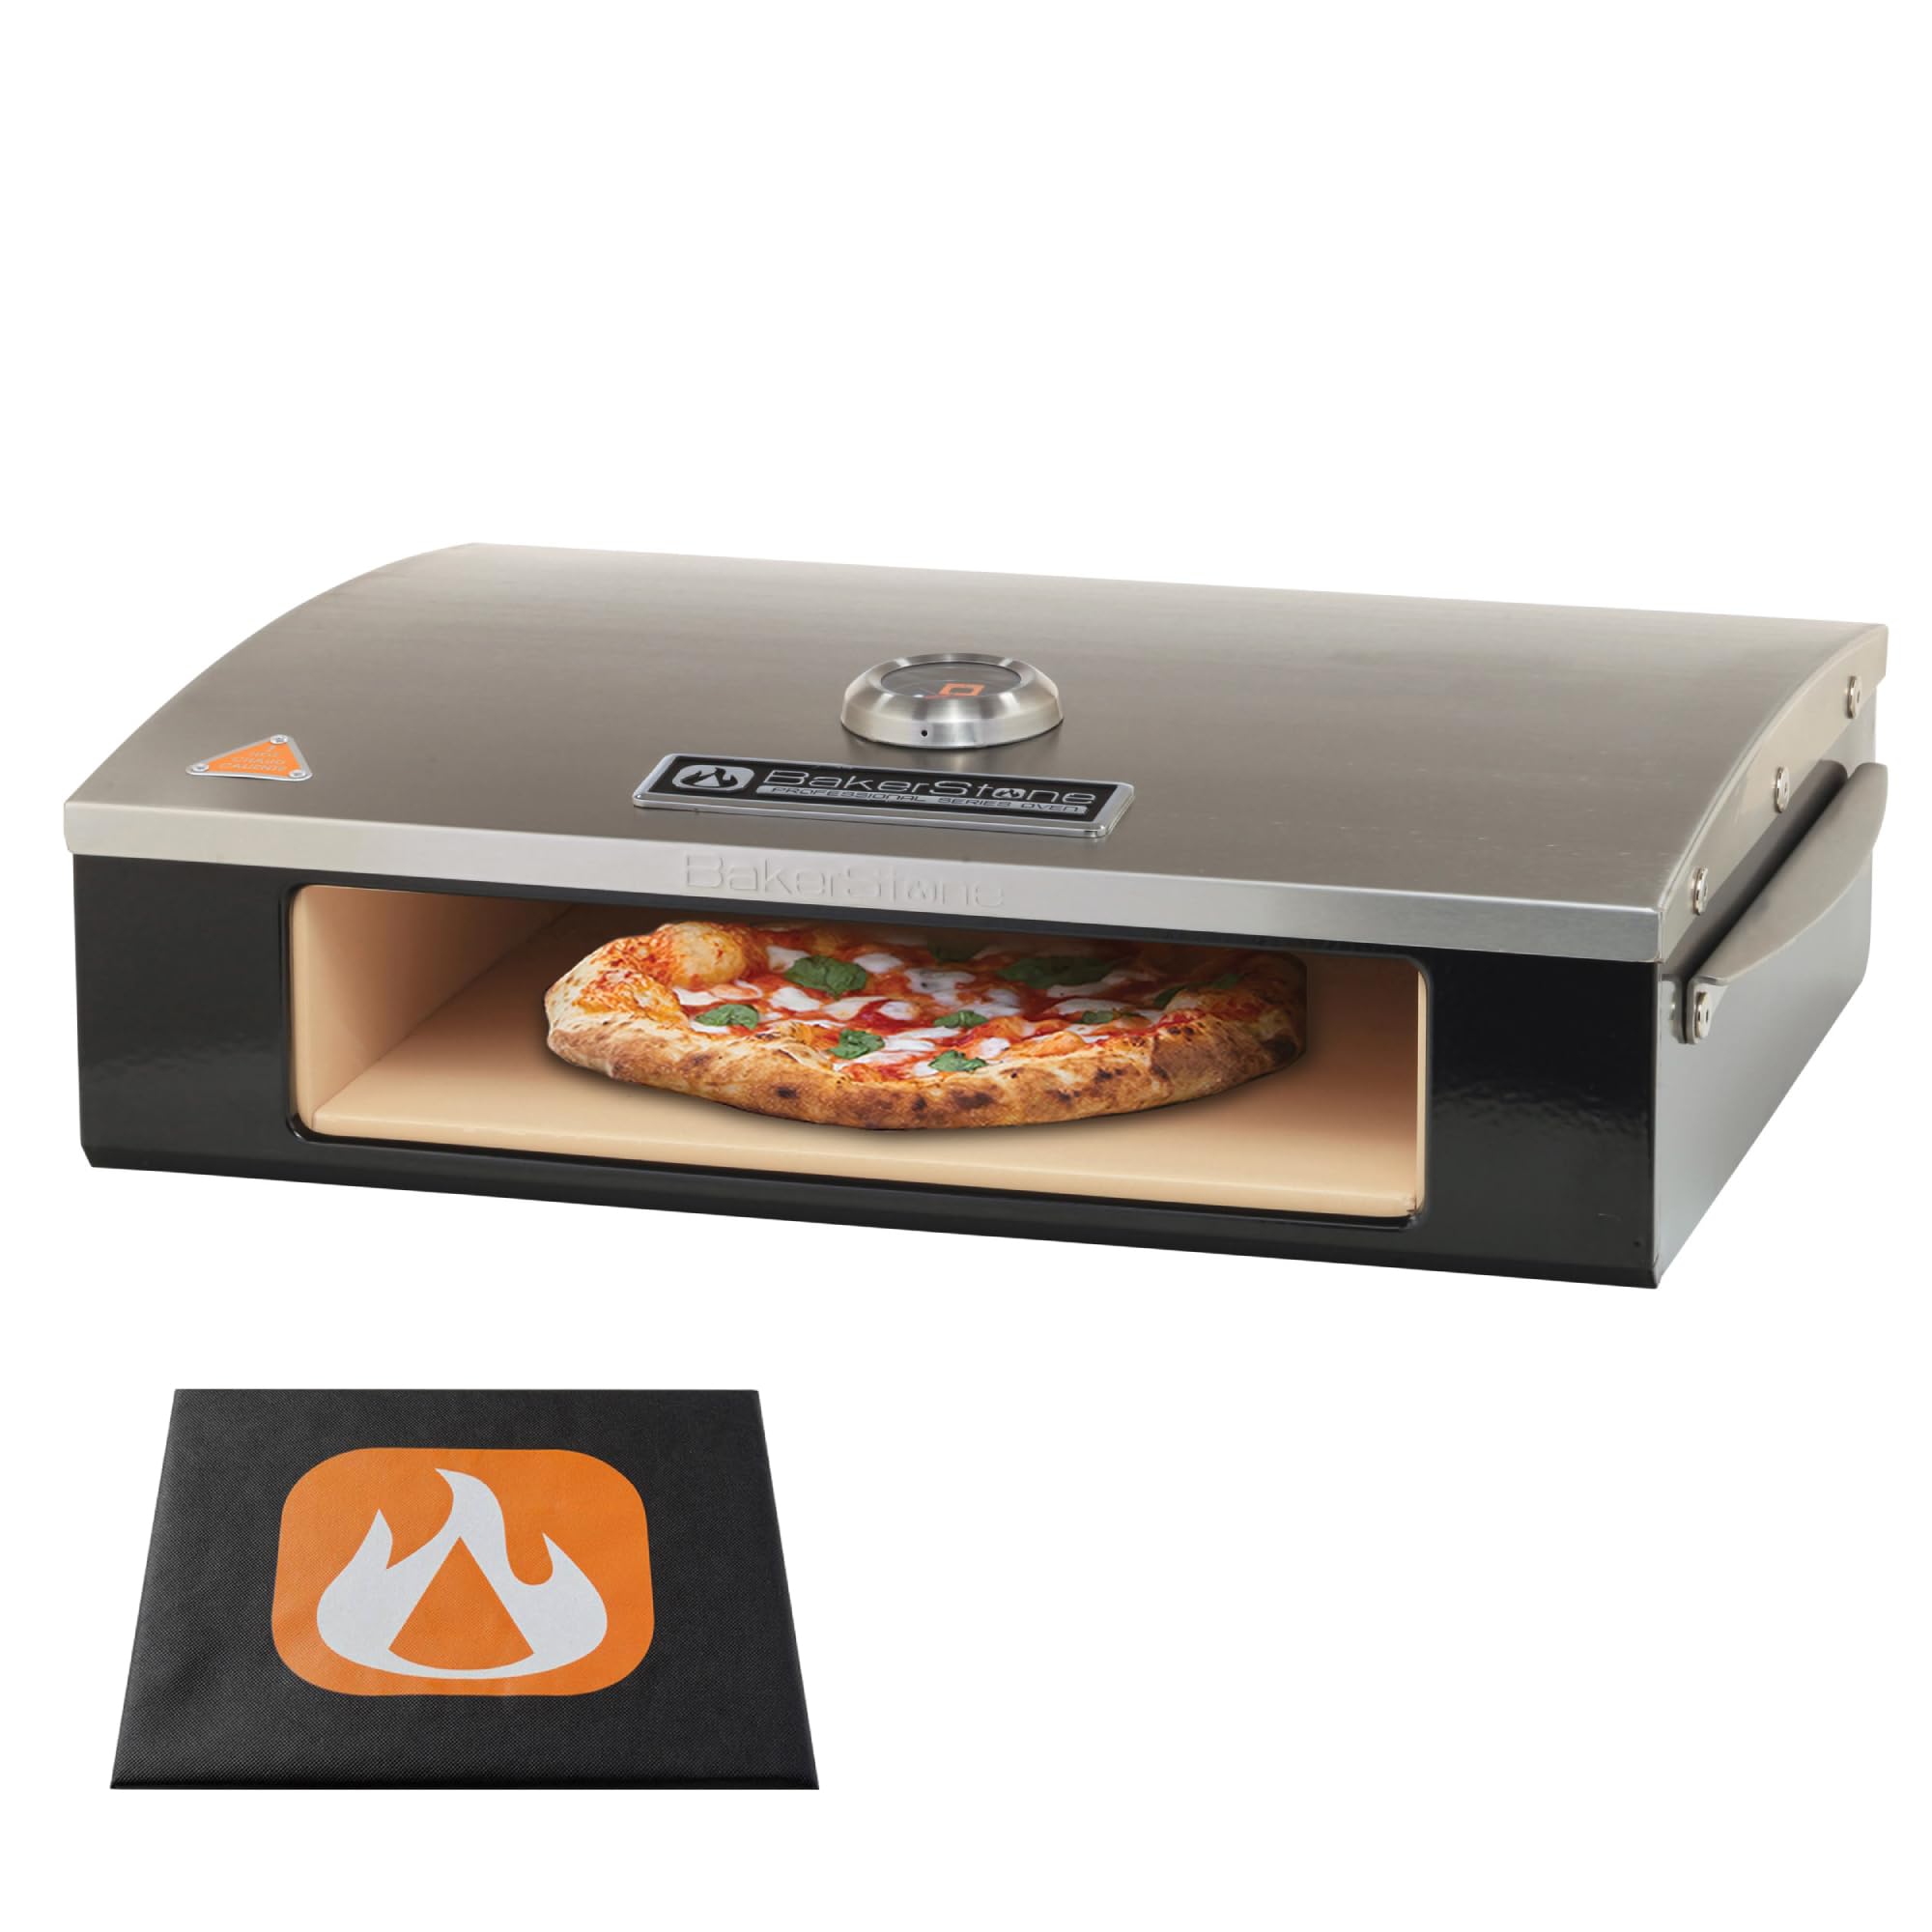 BakerStone P-AHXXX-O-000 Professional Series pizza oven, Black/Stainless